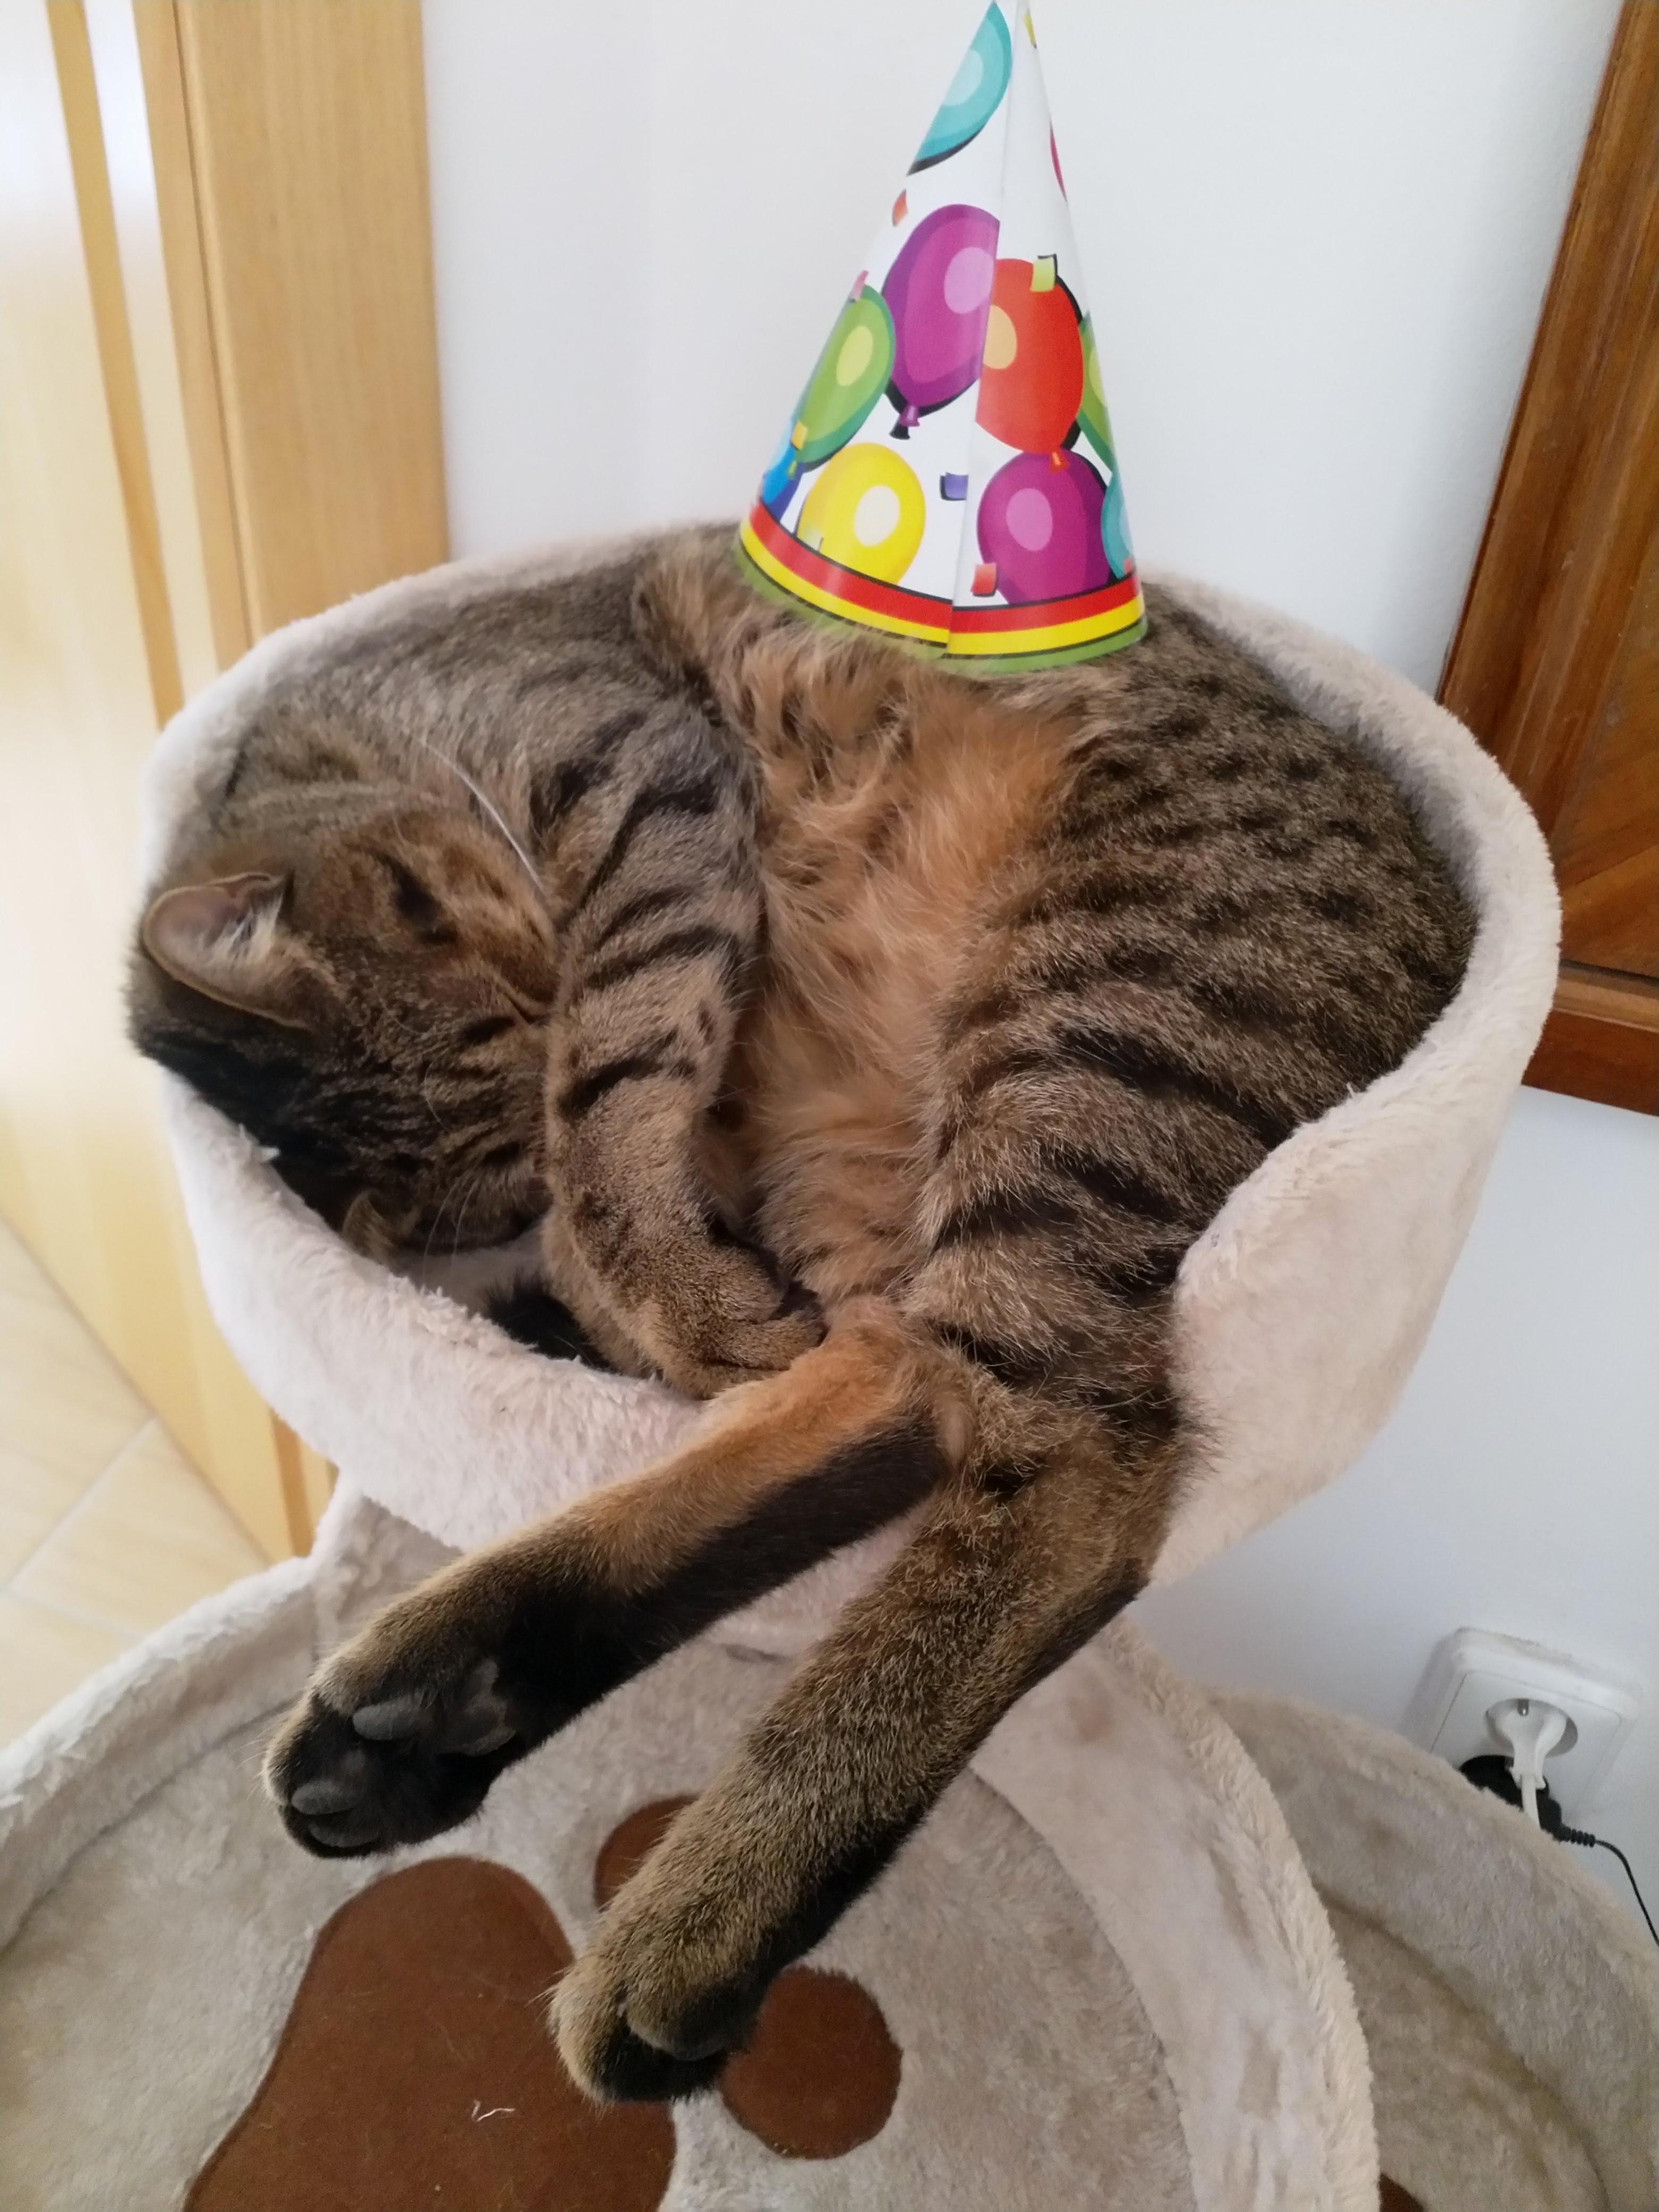 Our cat didnt seem too excited about his birthday celebration